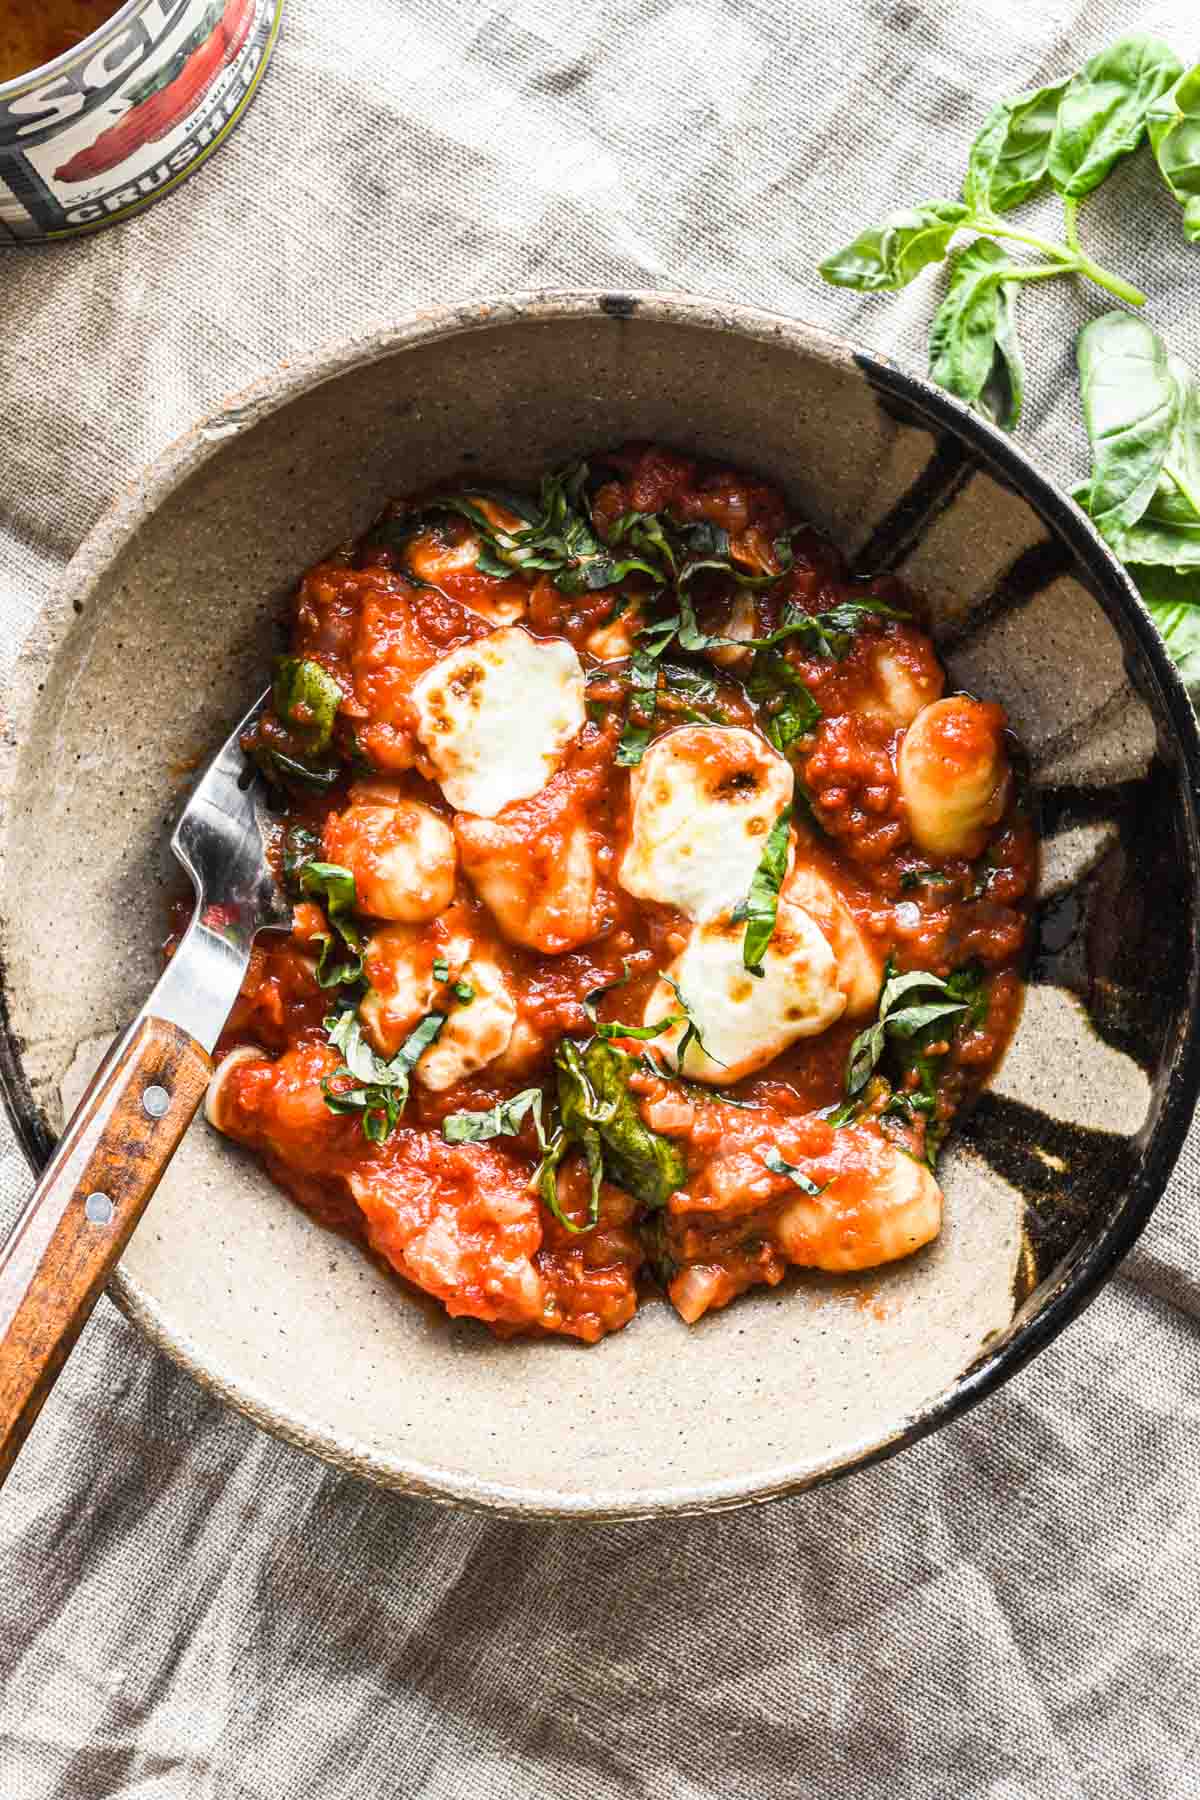 Serving of gnocchi in a bowl with basil.